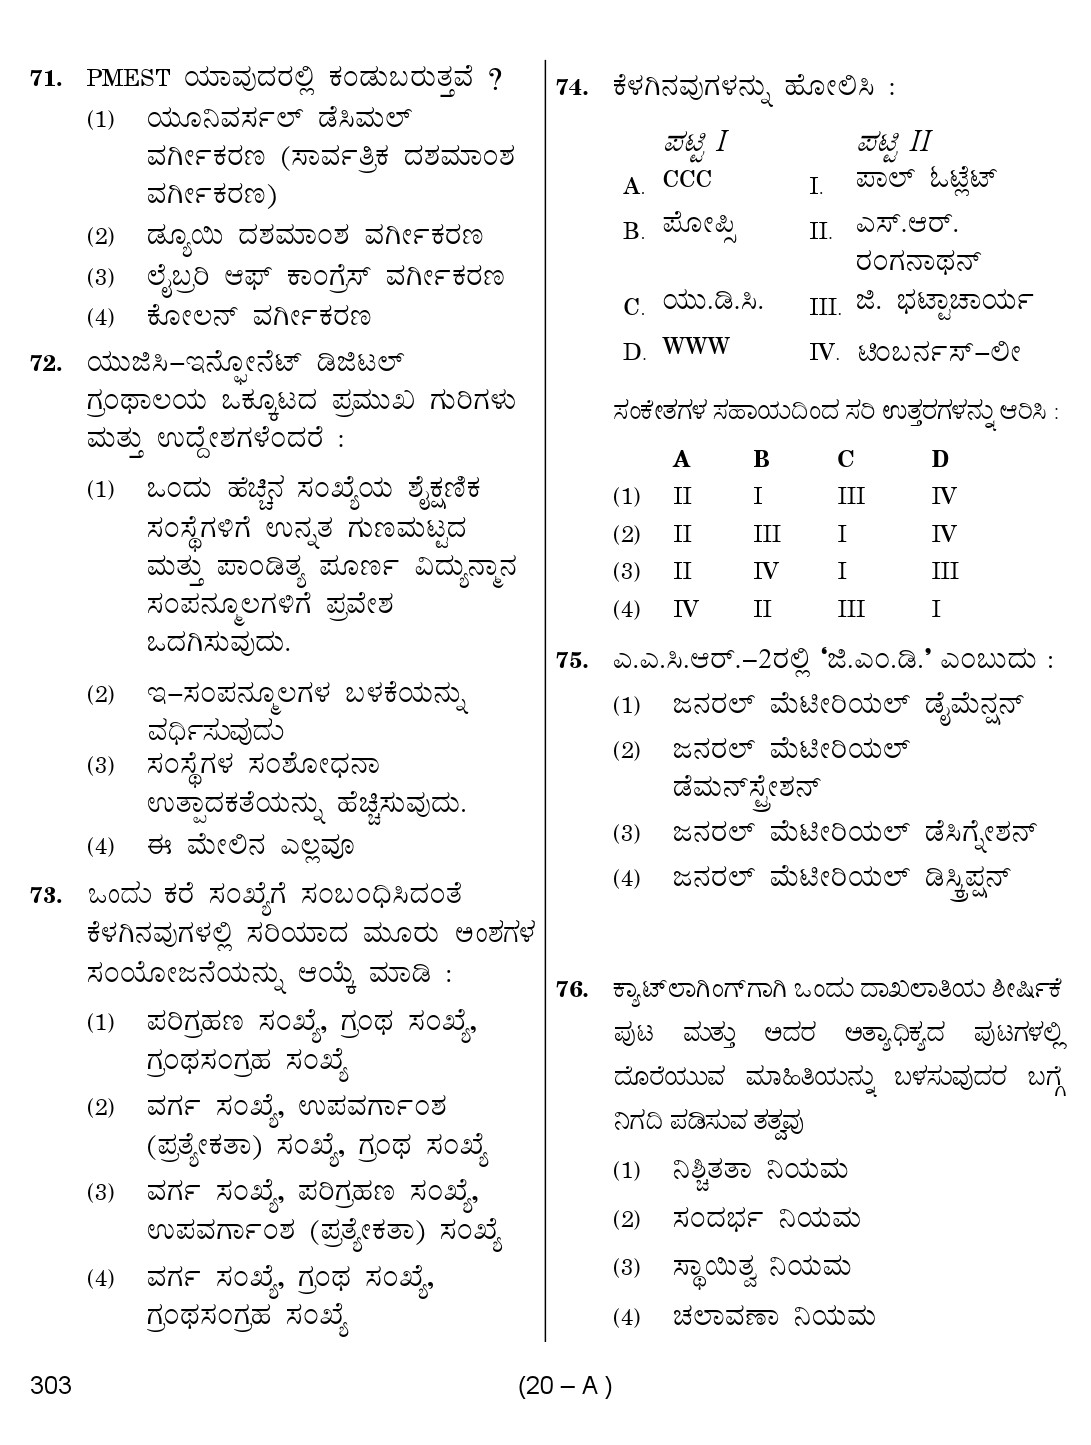 Karnataka PSC 303 Specific Paper II Librarian Exam Sample Question Paper 20